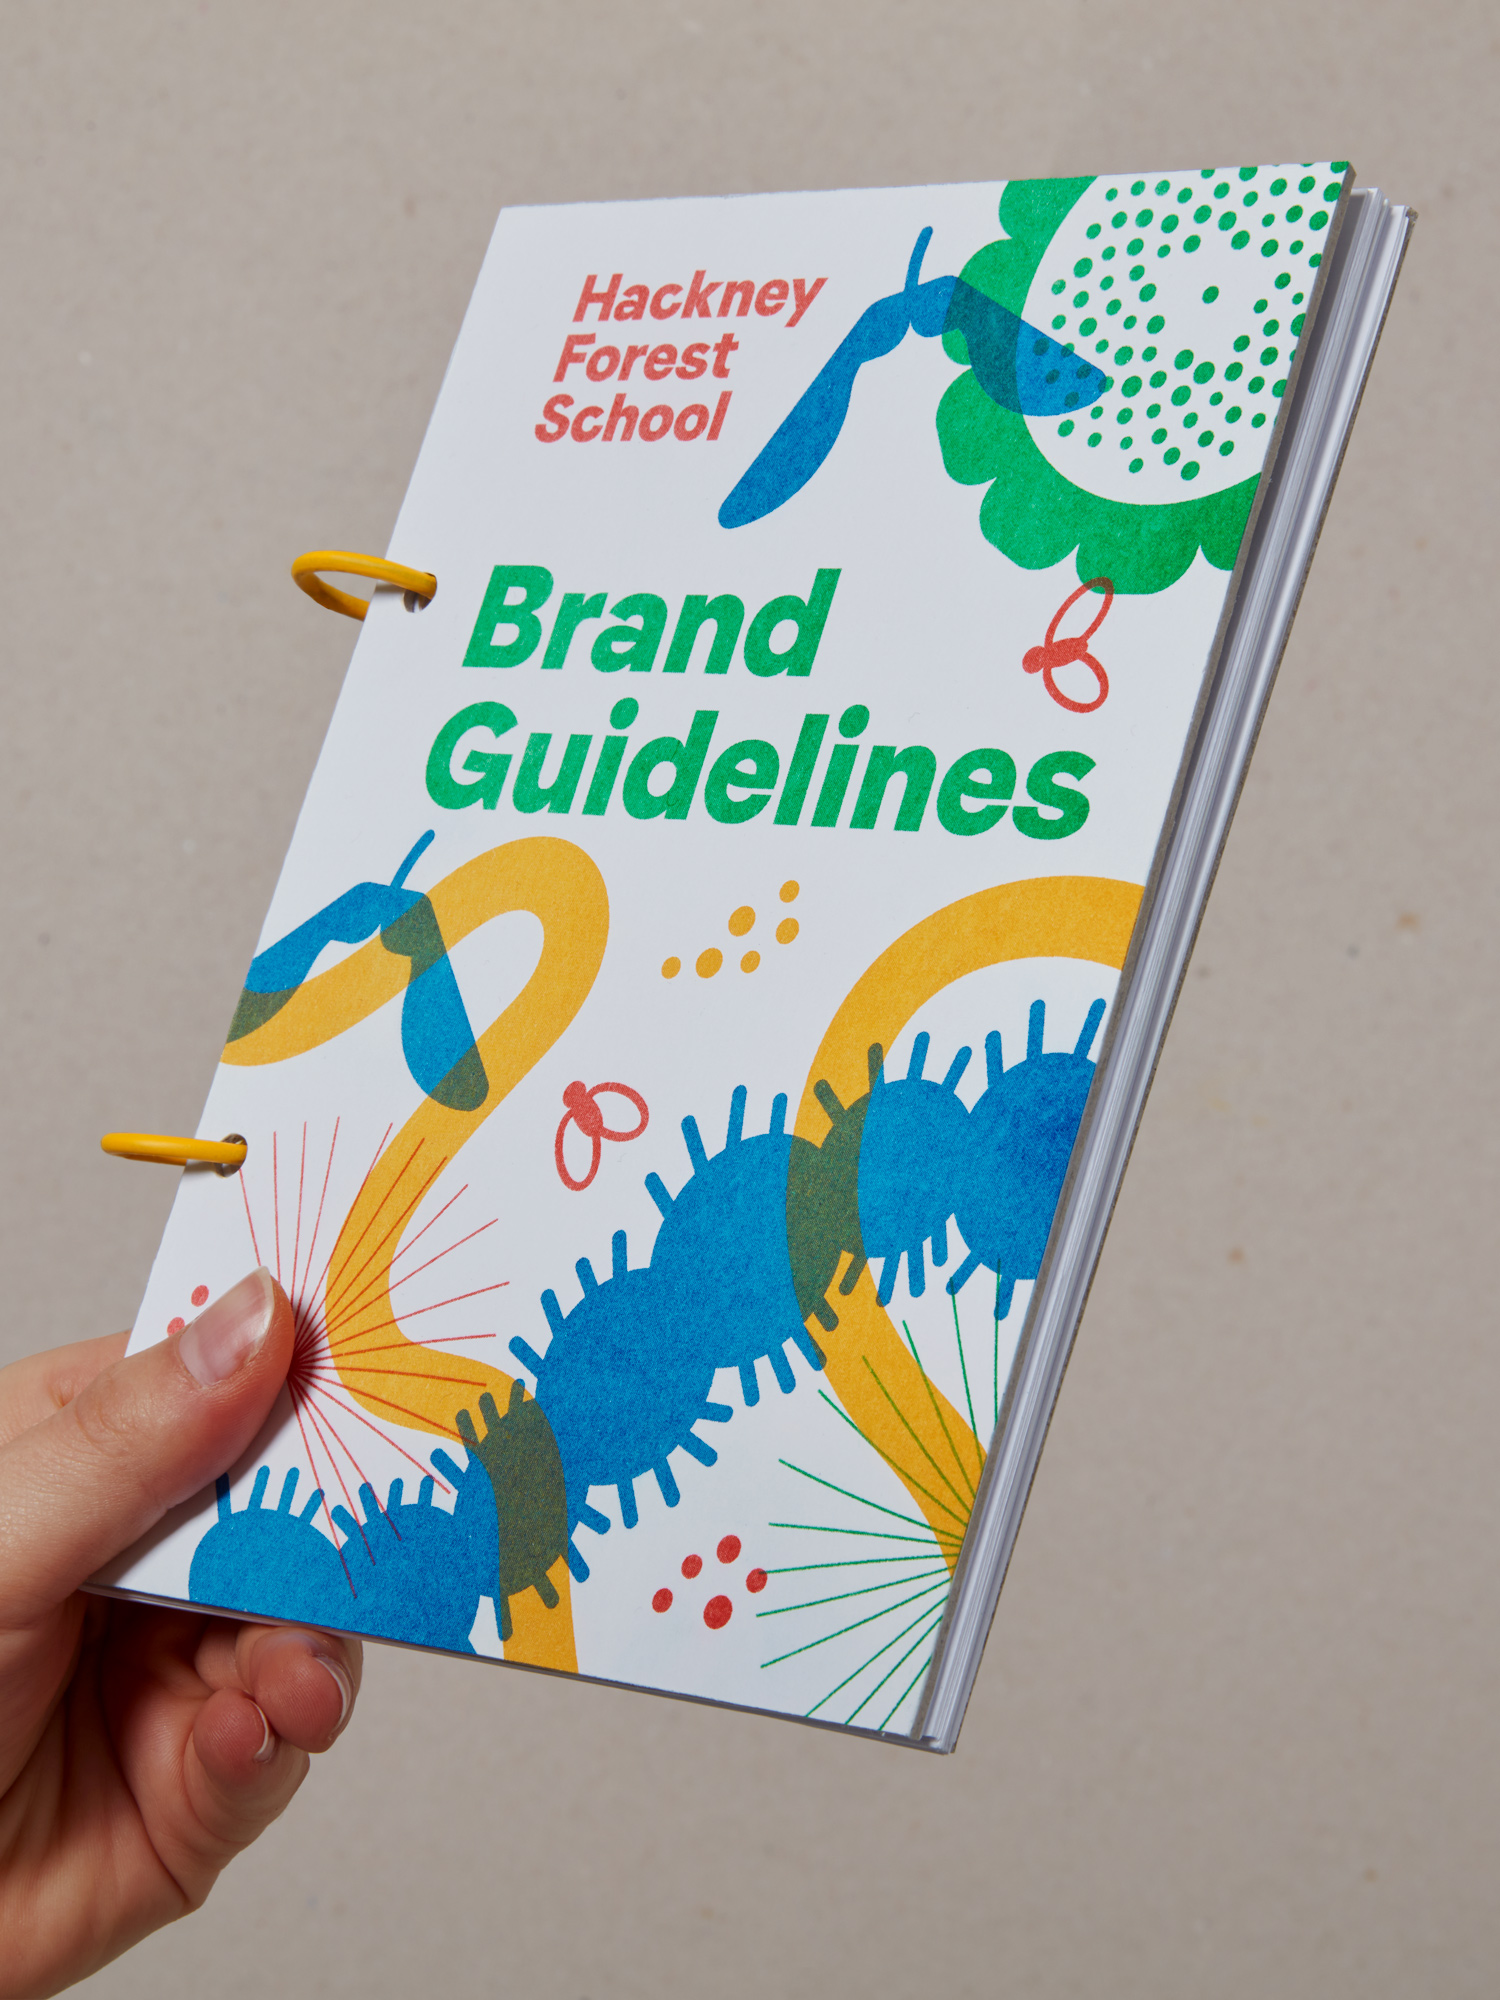 Visual identity and brand book designed by Spy for Hackney Forest School